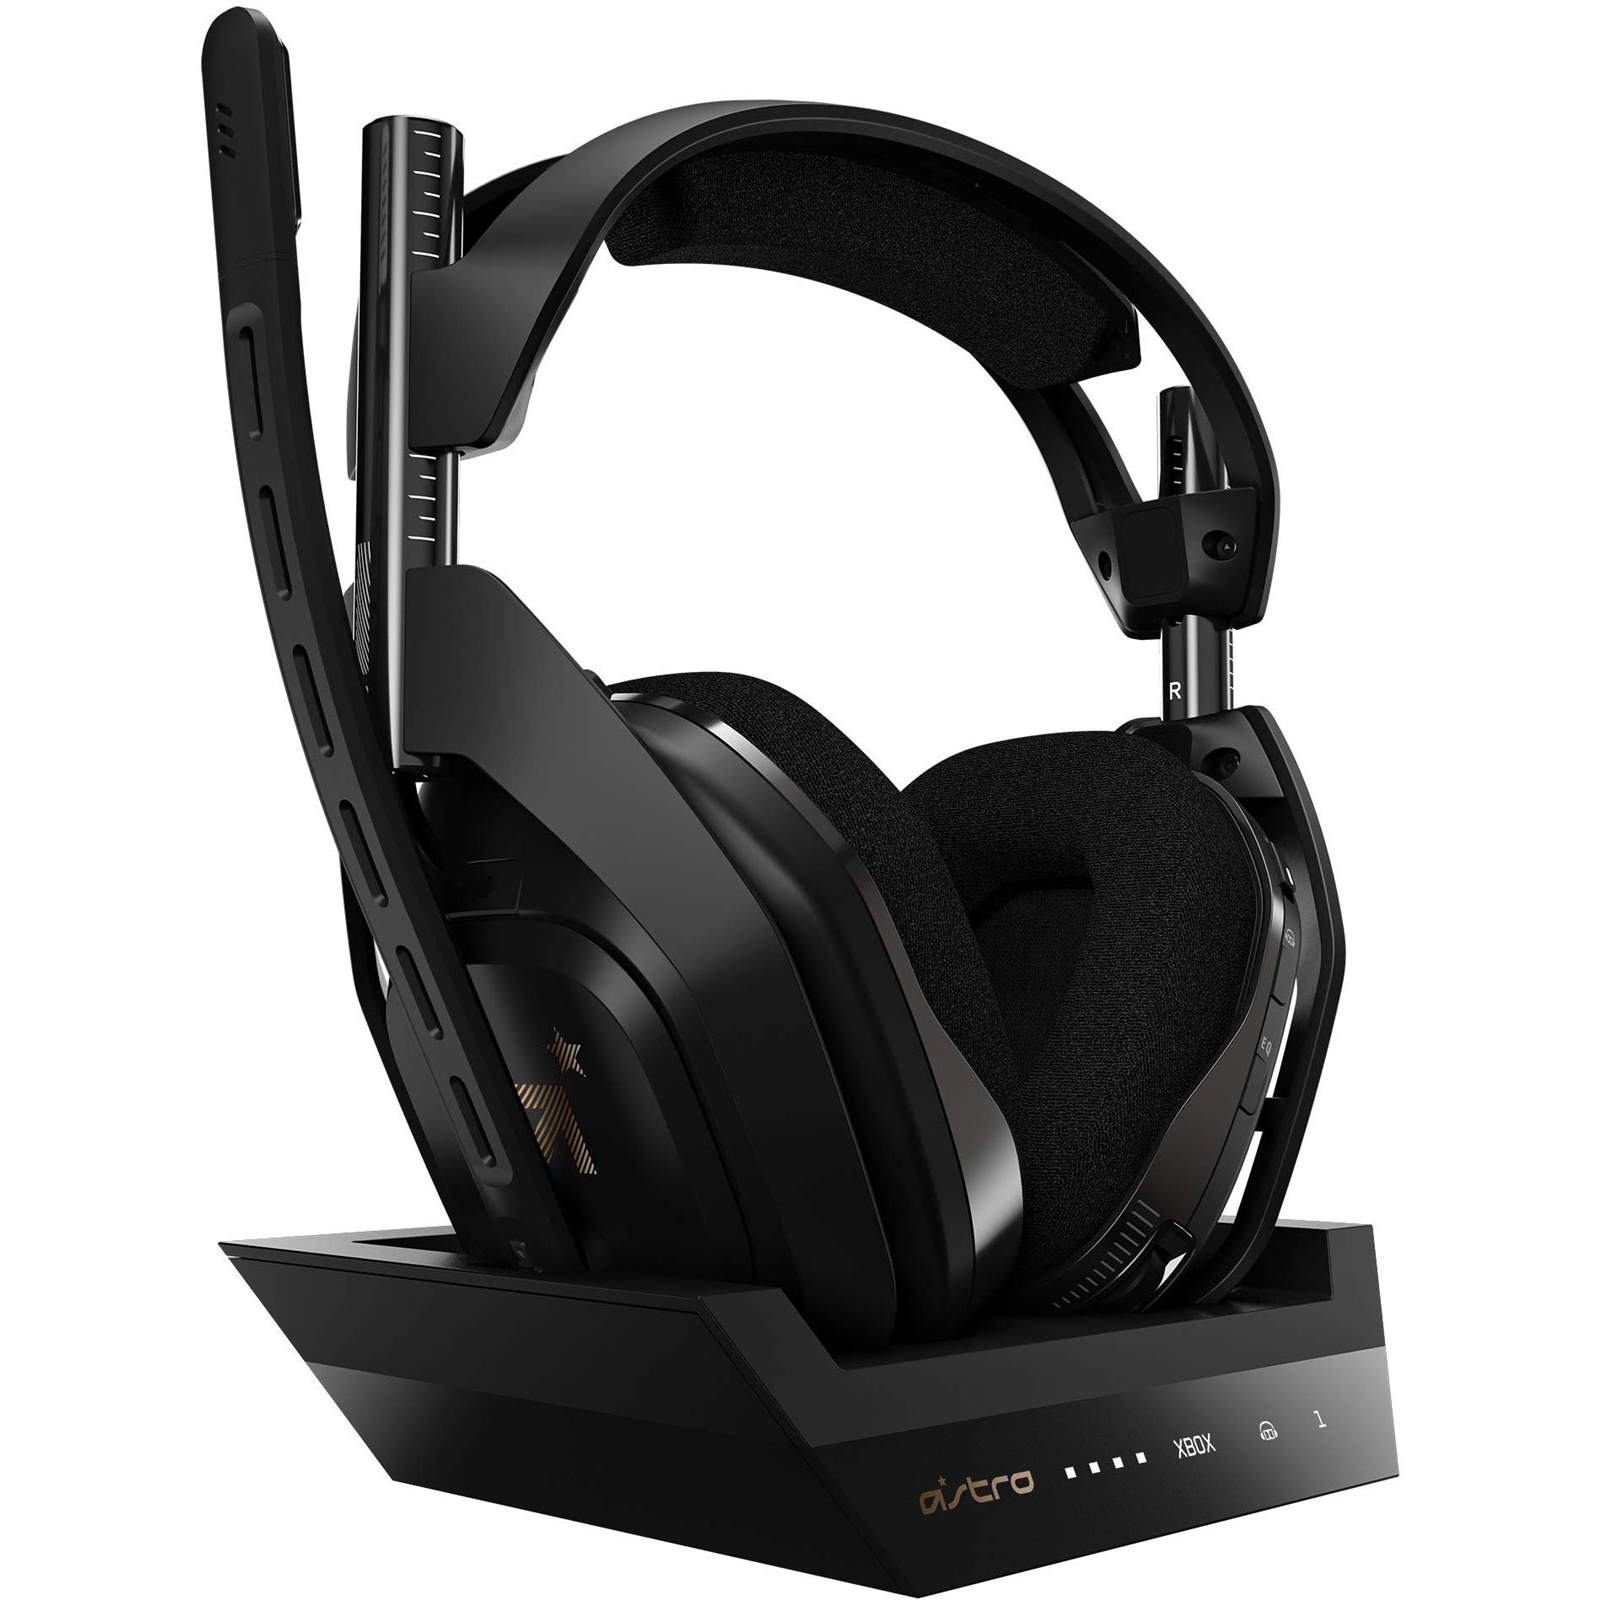 Buy the Astro A50 Wireless Gaming Headset for Xbox One, PC & Mac Discord...  ( 939-001680 ) online - PBTech.com/pacific